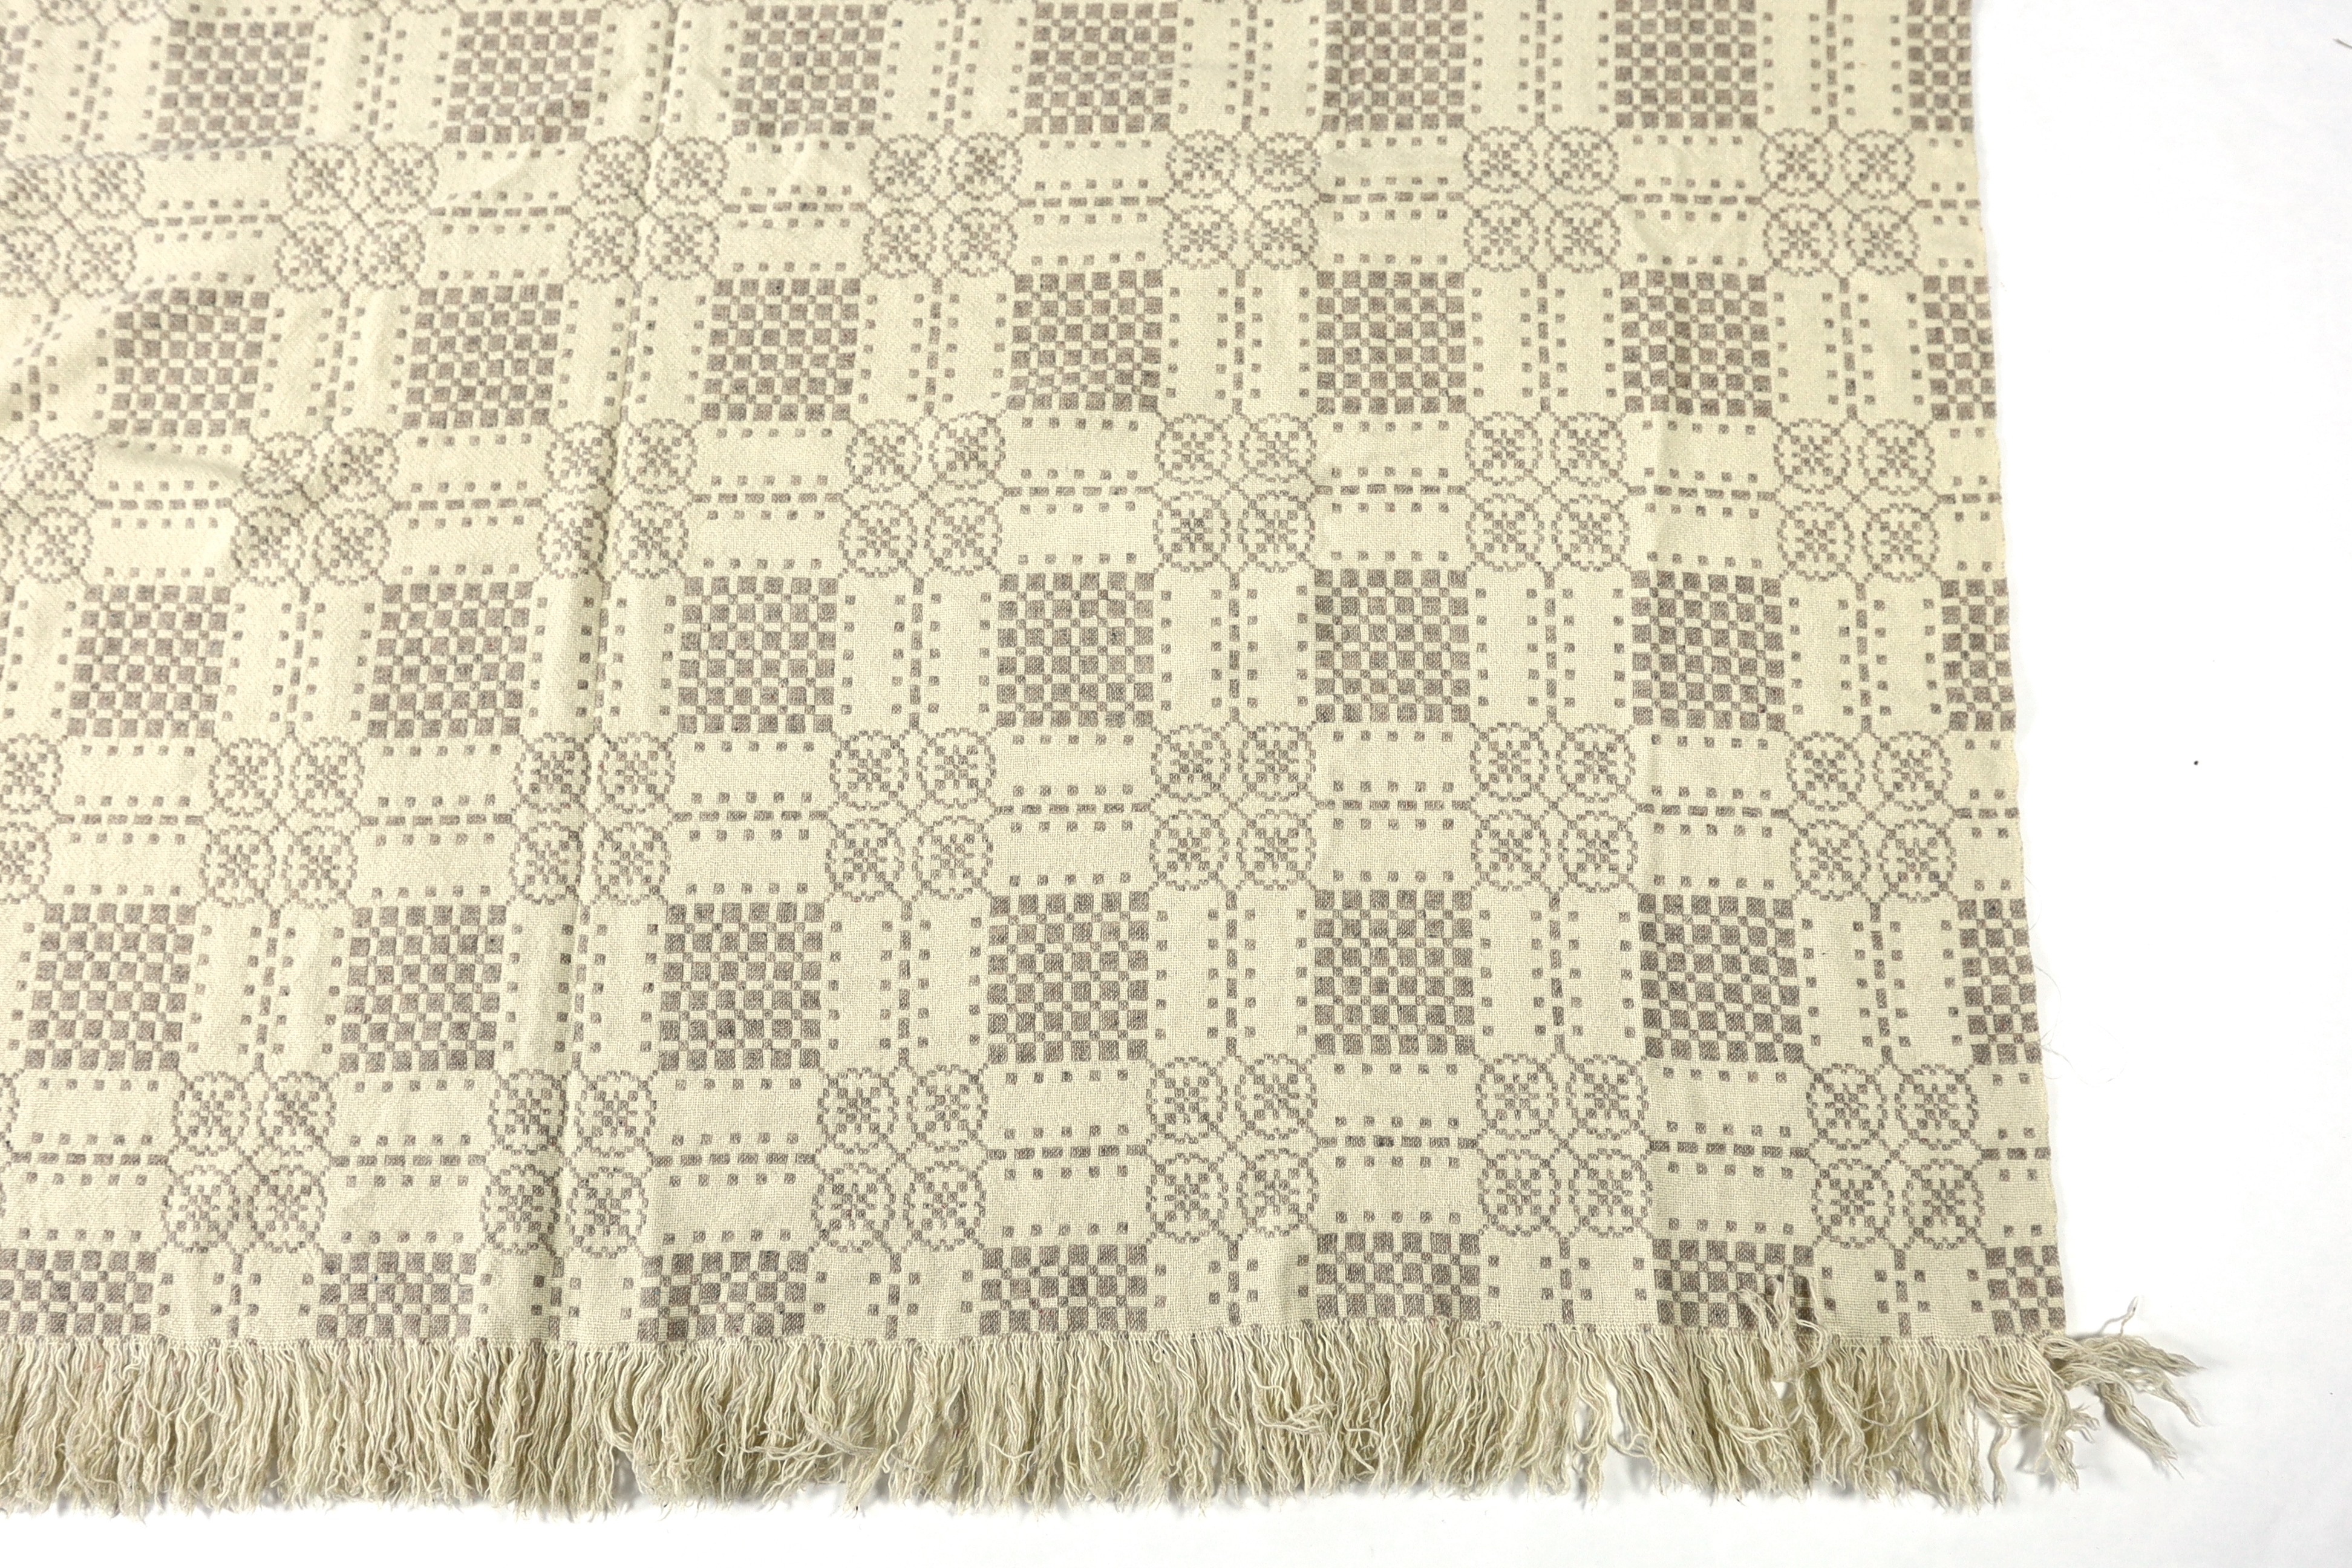 A Welsh wool woven blanket, using mushroom and cream wool in a reversible geometric design, 192cm wide x 212cm long